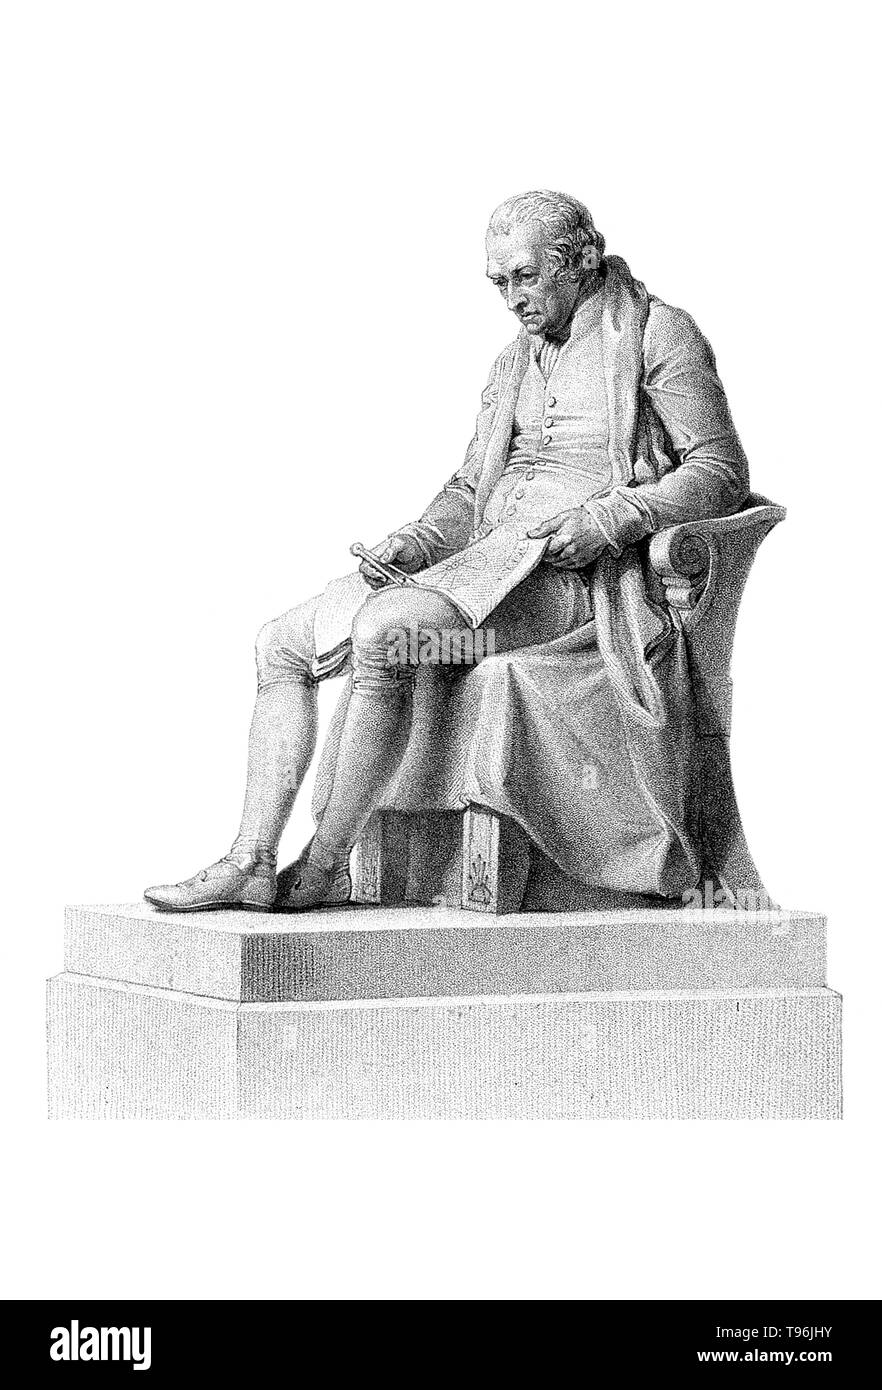 James Watt (January 30, 1736 - August 25, 1819) was a Scottish inventor and mechanical engineer whose improvements to the Newcomen steam engine were fundamental to the changes brought by the Industrial Revolution. Watt introduced a design enhancement, the separate condenser, which avoided this waste of energy and radically improved the power, efficiency, and cost-effectiveness of steam engines. Stock Photo